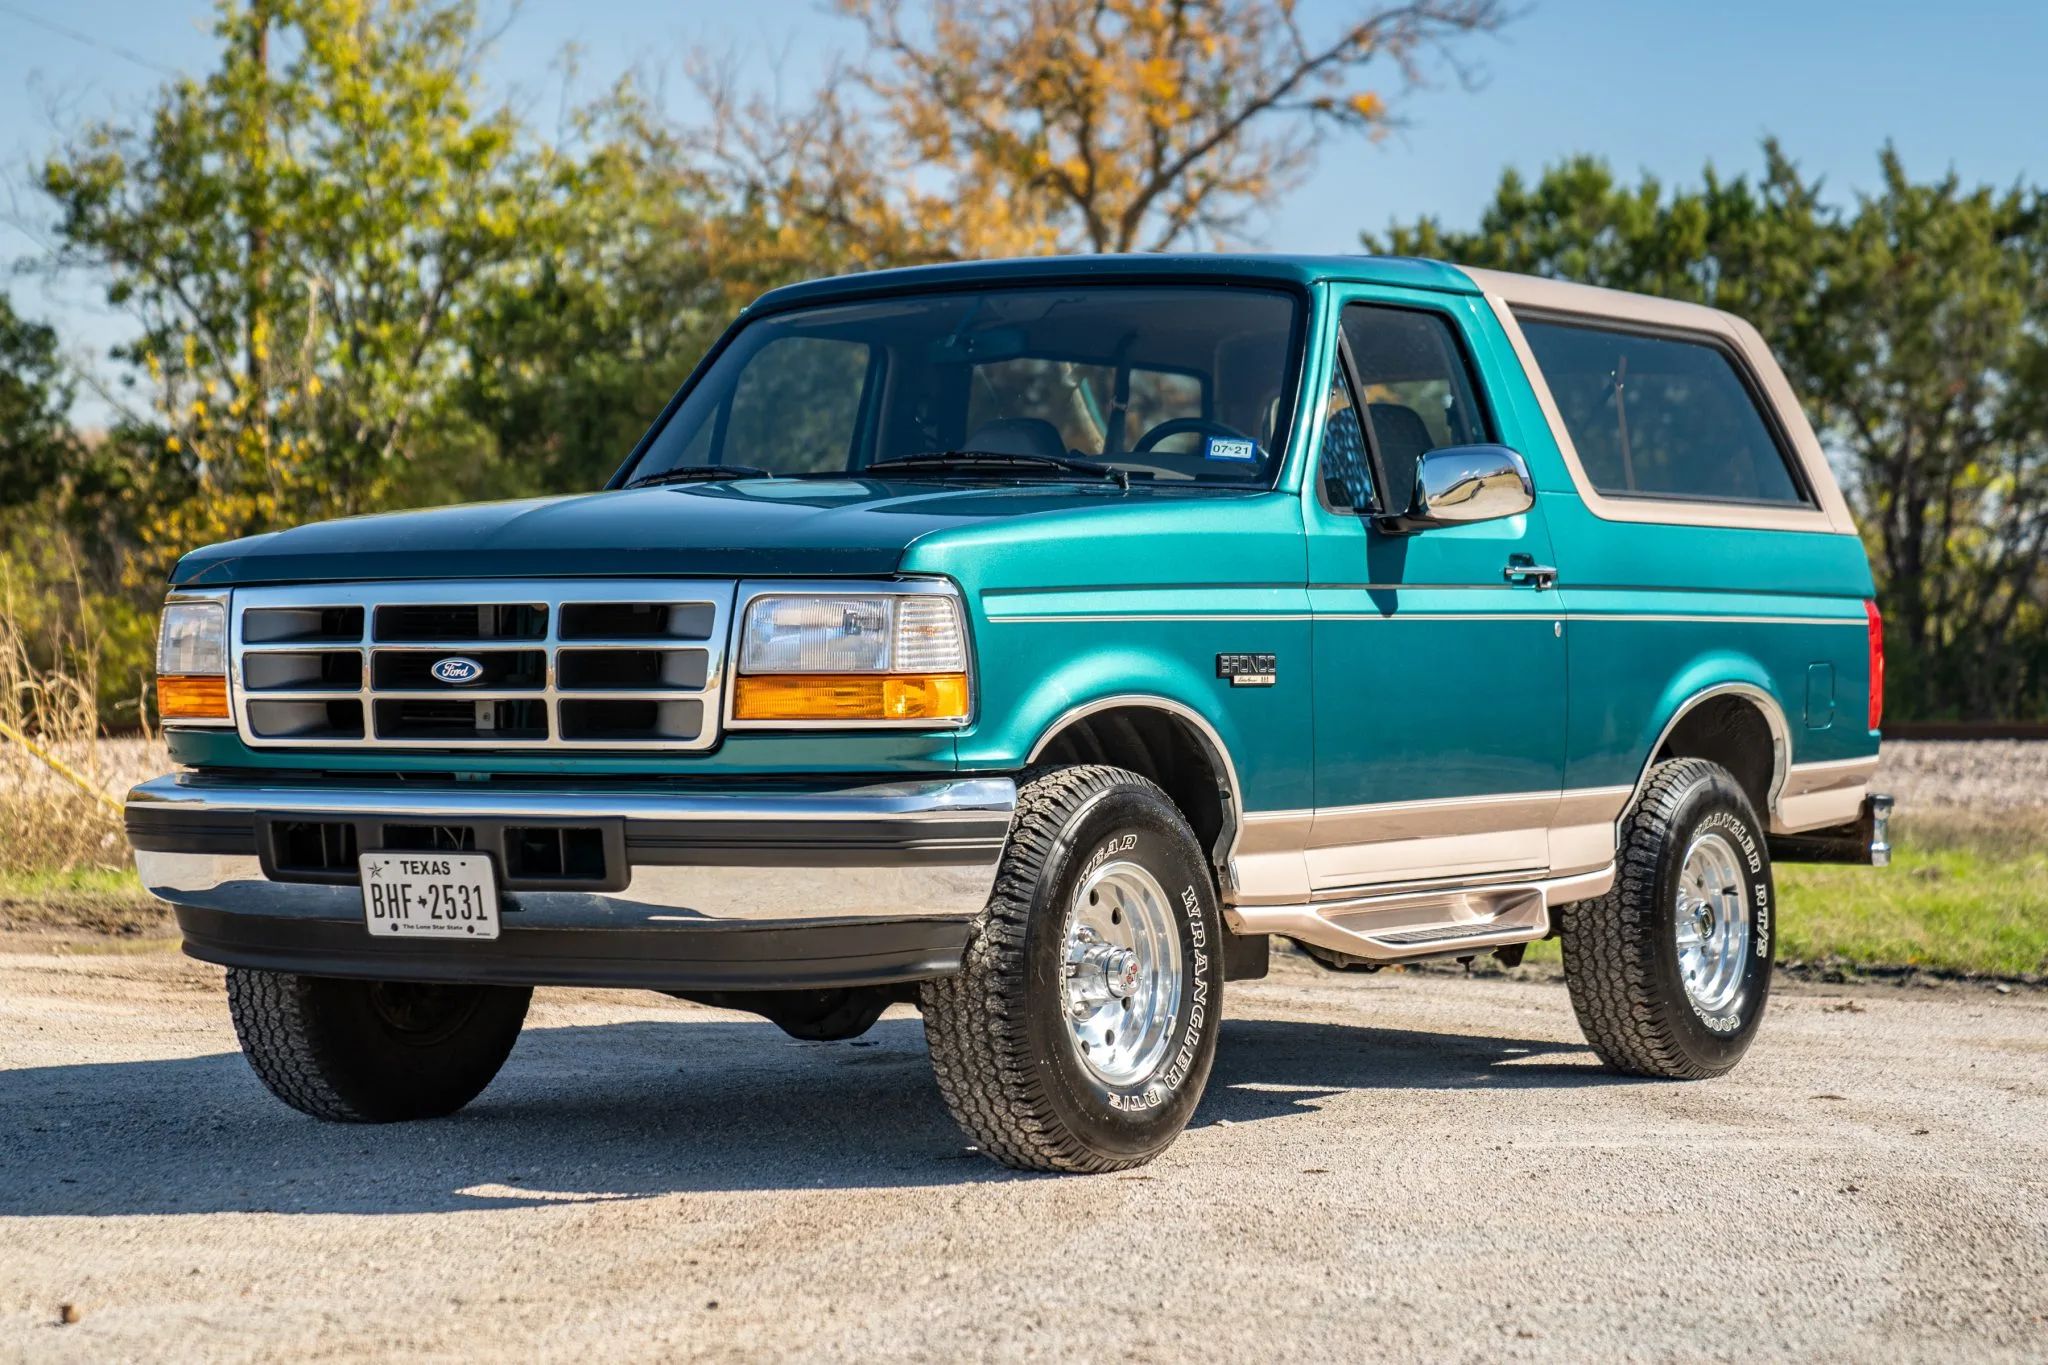 This 1996 Ford Bronco Eddie Bauer Has Less Than 5,000 Miles, It's Pristine  Inside and Out - autoevolution